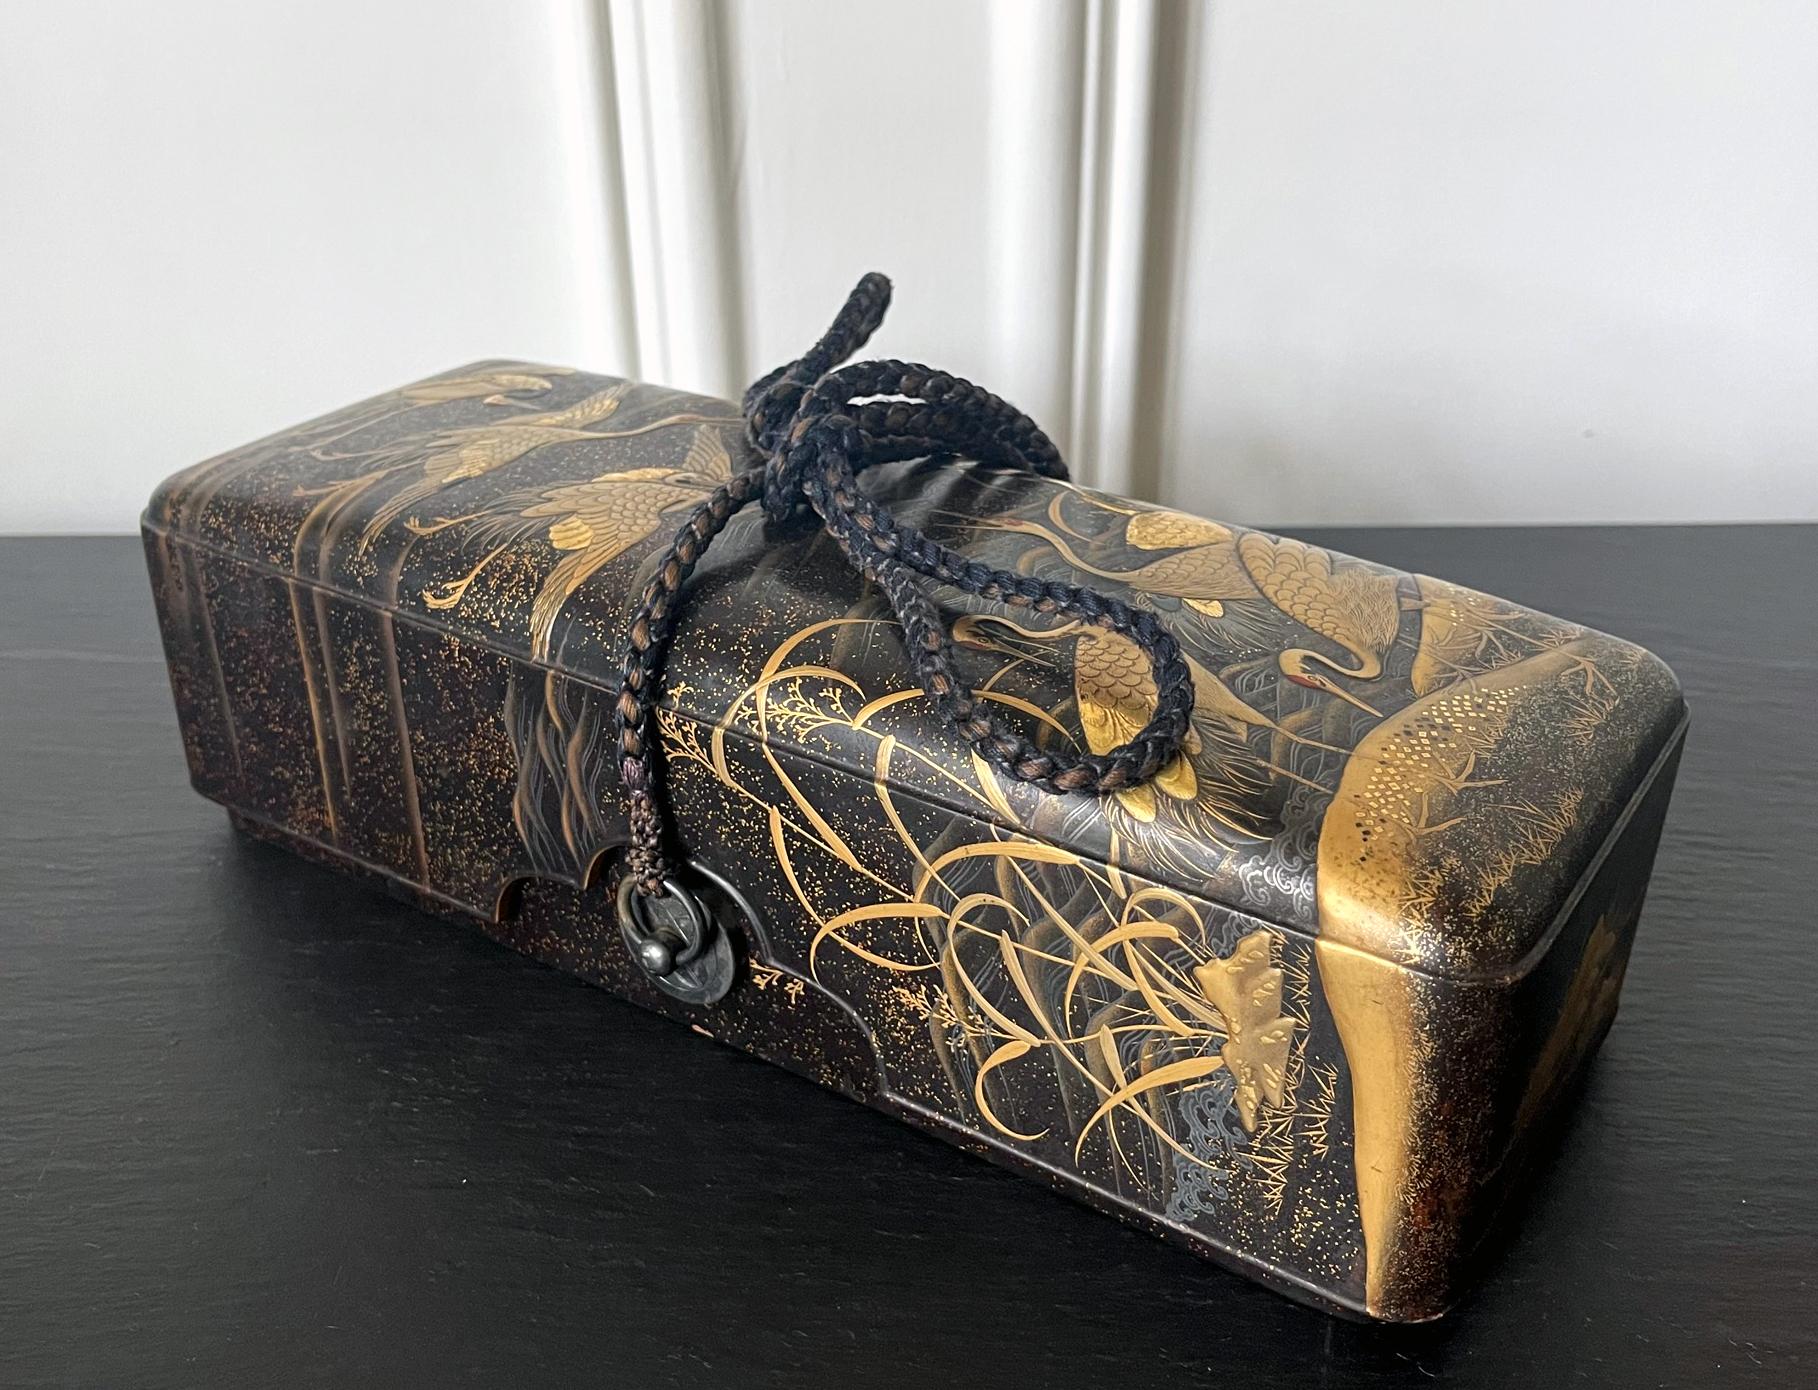 A Japanese lacquered wood fubako with fine maki-e decoration (Fubako is a box used to store document or small scroll painting), circa 18th century Edo period. The rectangular box features a deep lipped lid with slightly rounded corners, a conforming